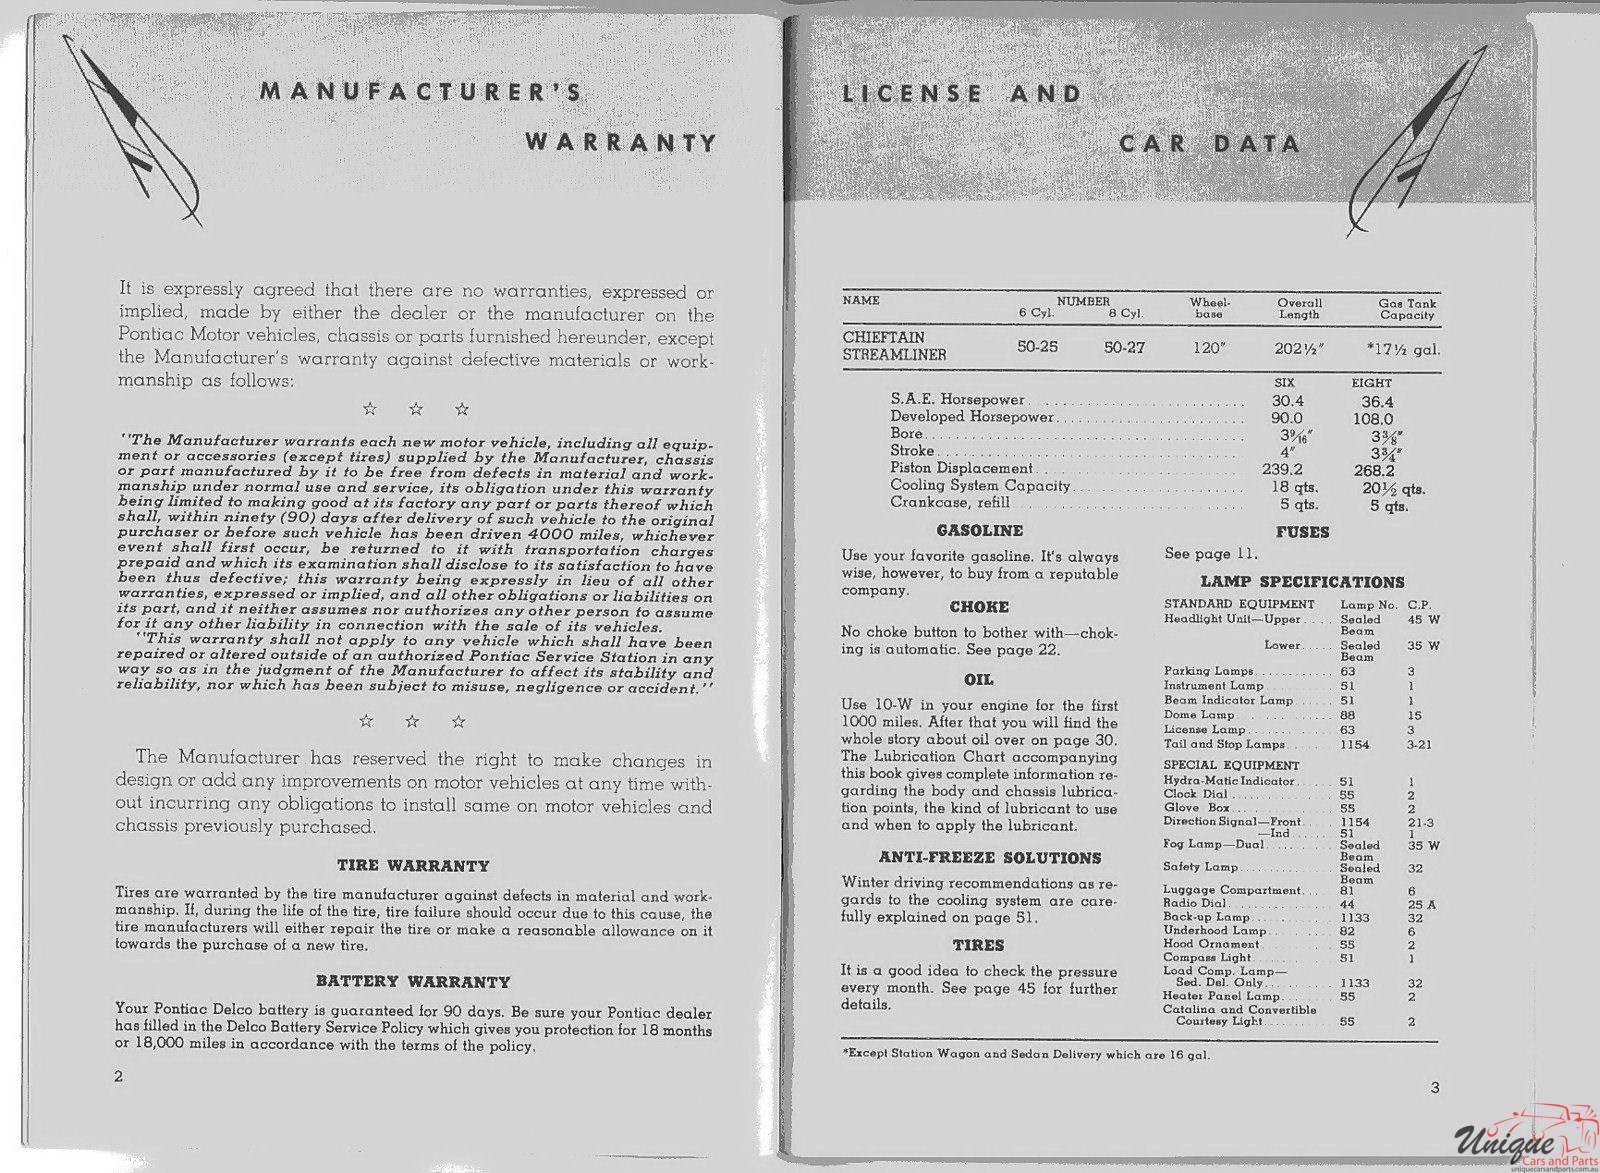 1950 Pontiac Owners Manual Page 24